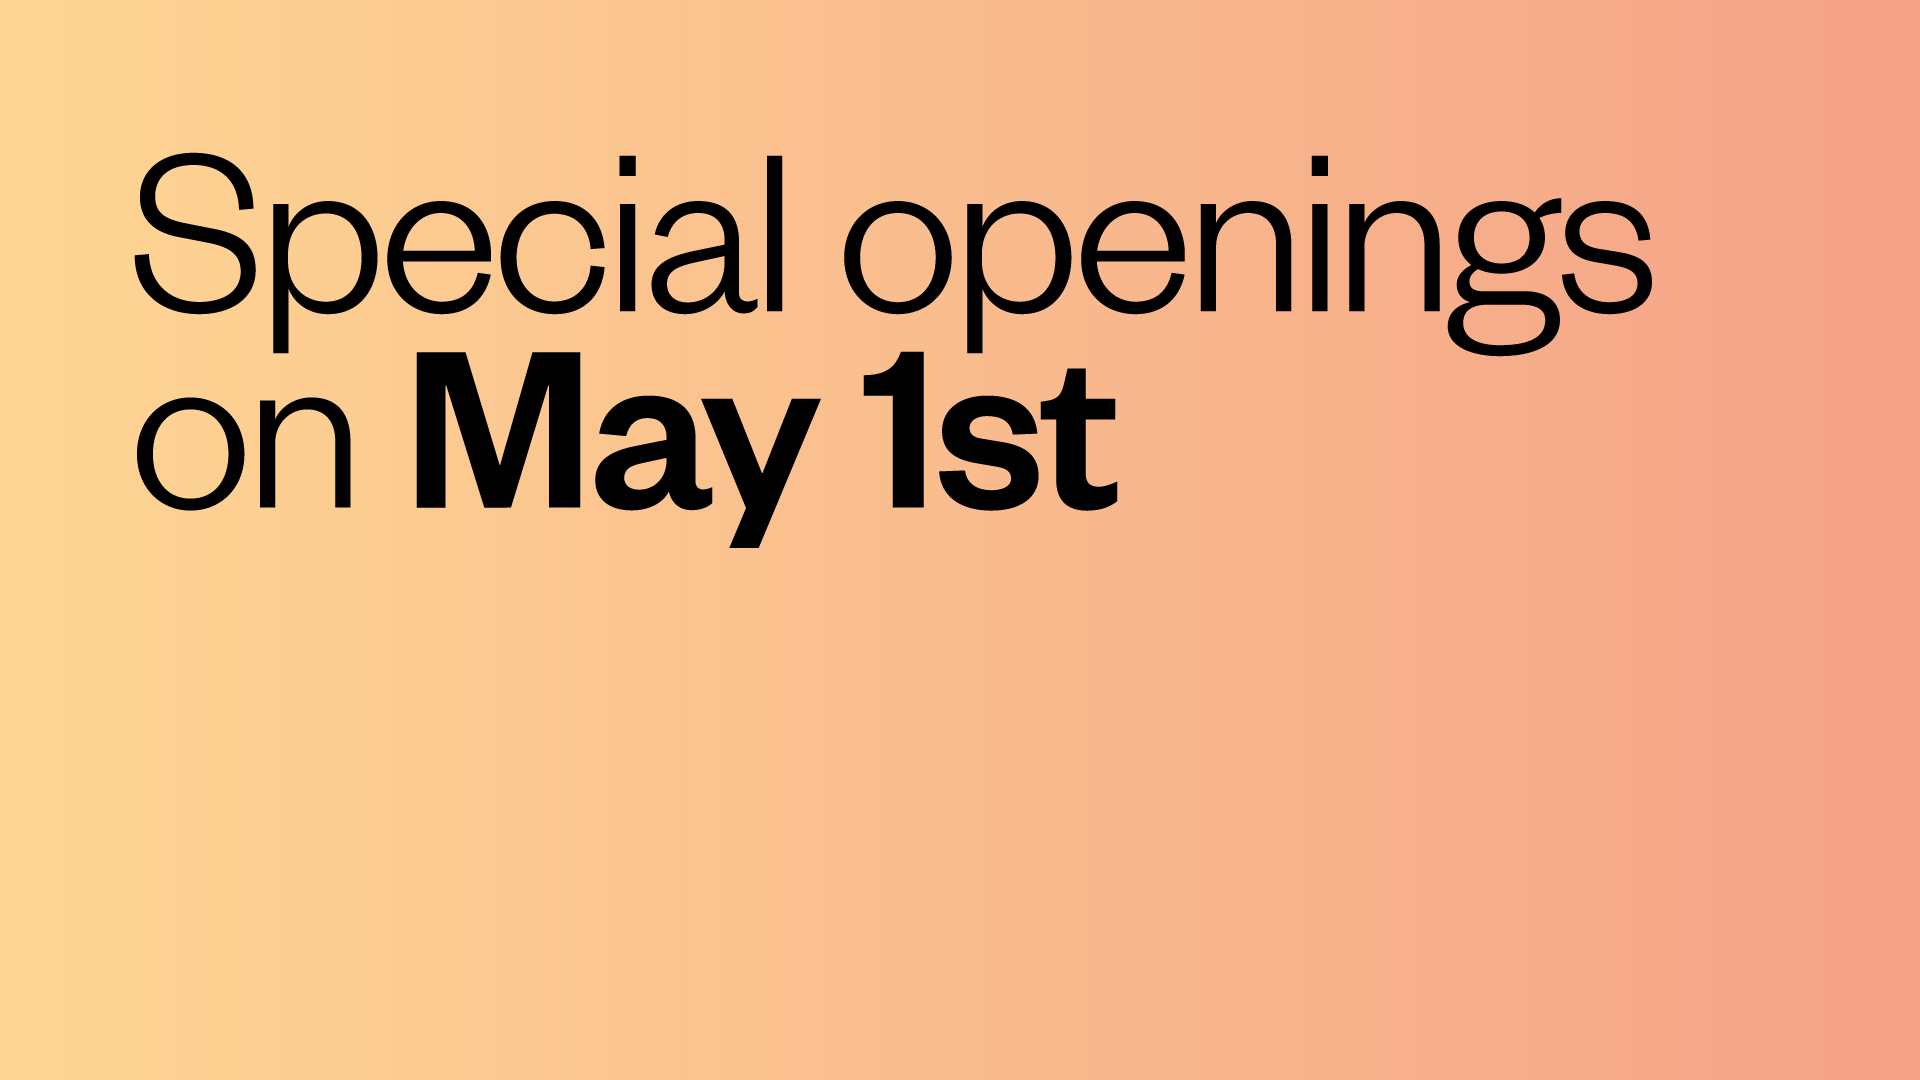 Special openings on May 1st